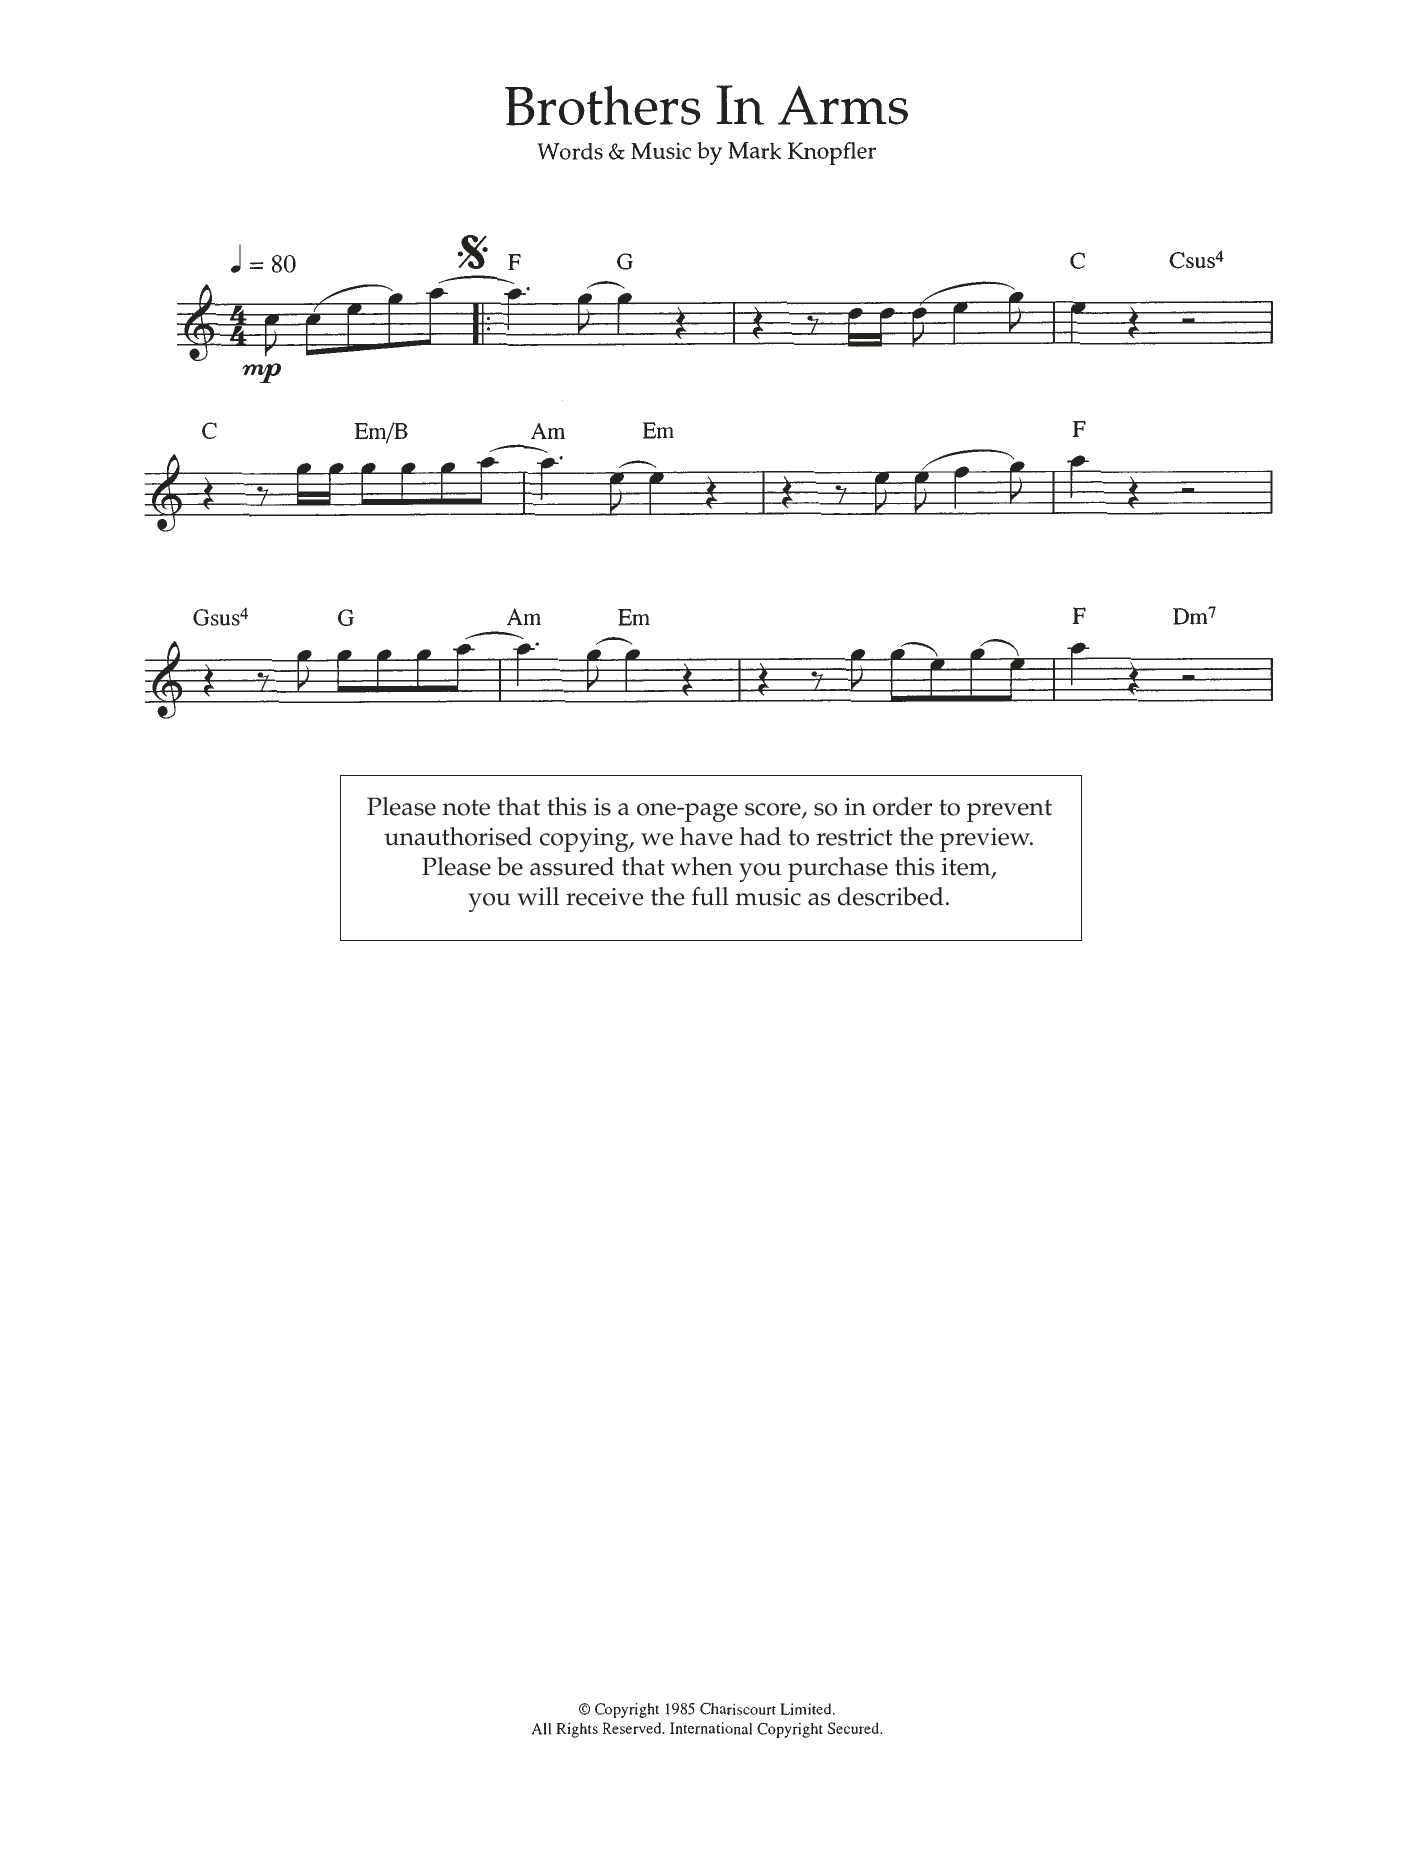 Download Dire Straits Brothers In Arms Sheet Music